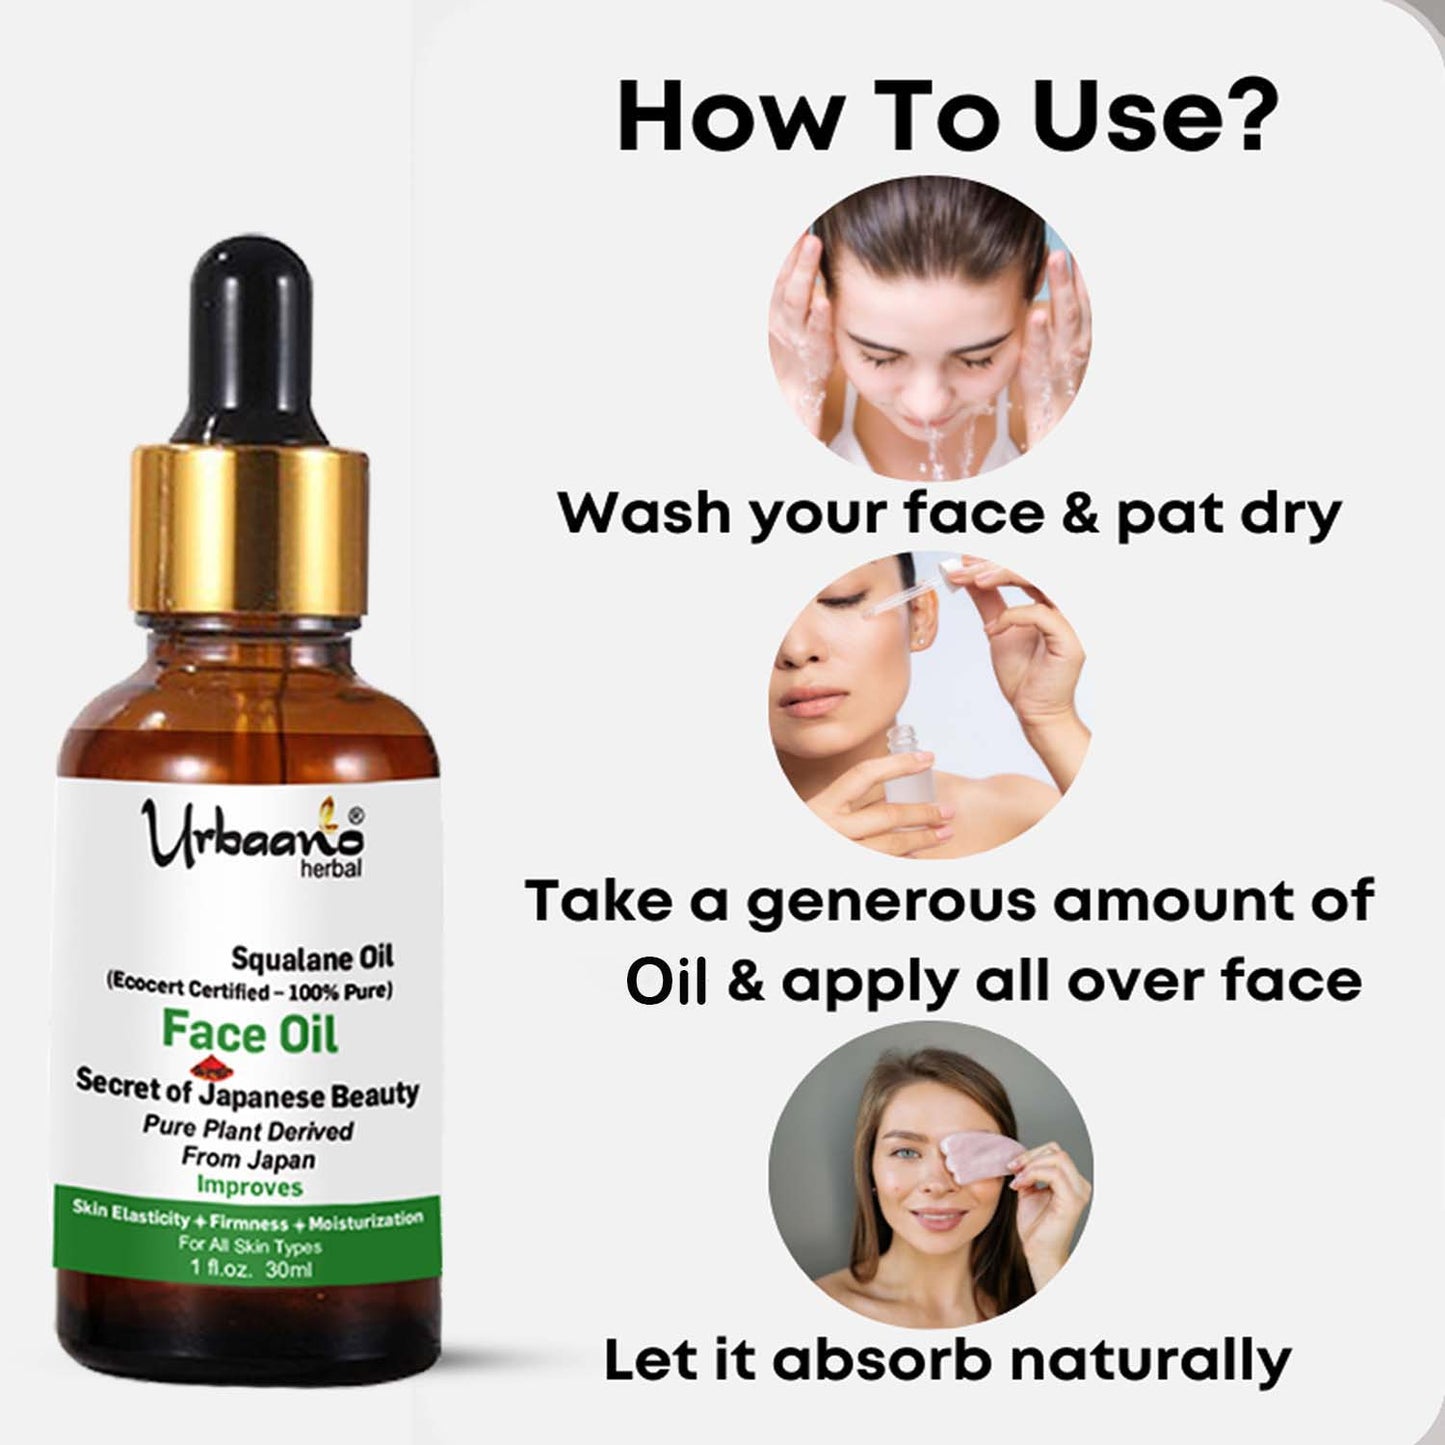 urbaano herbal face oil pure natural olive squalane oil from japan easy to apply, every day use 